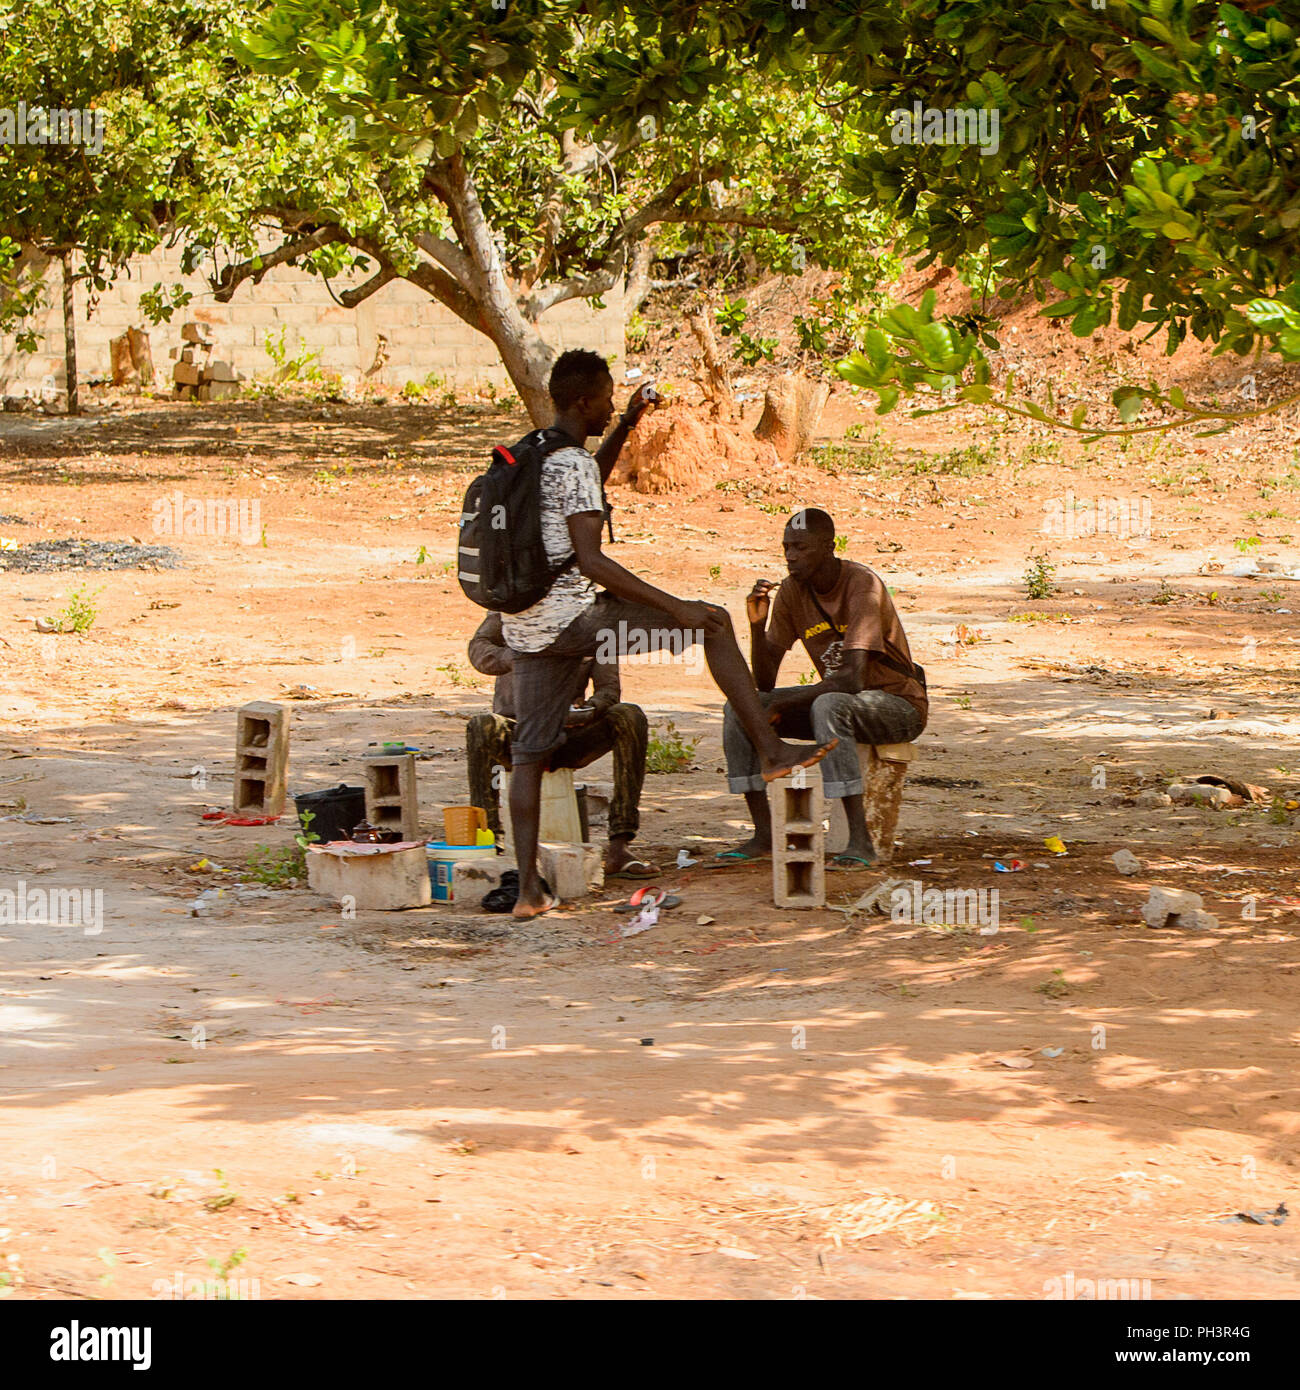 ROAD TO BISSAU, GUINEA B. - MAY 1, 2017: Unidentified local men talk about something in a village in Guinea Bissau. Still many people in the country l Stock Photo